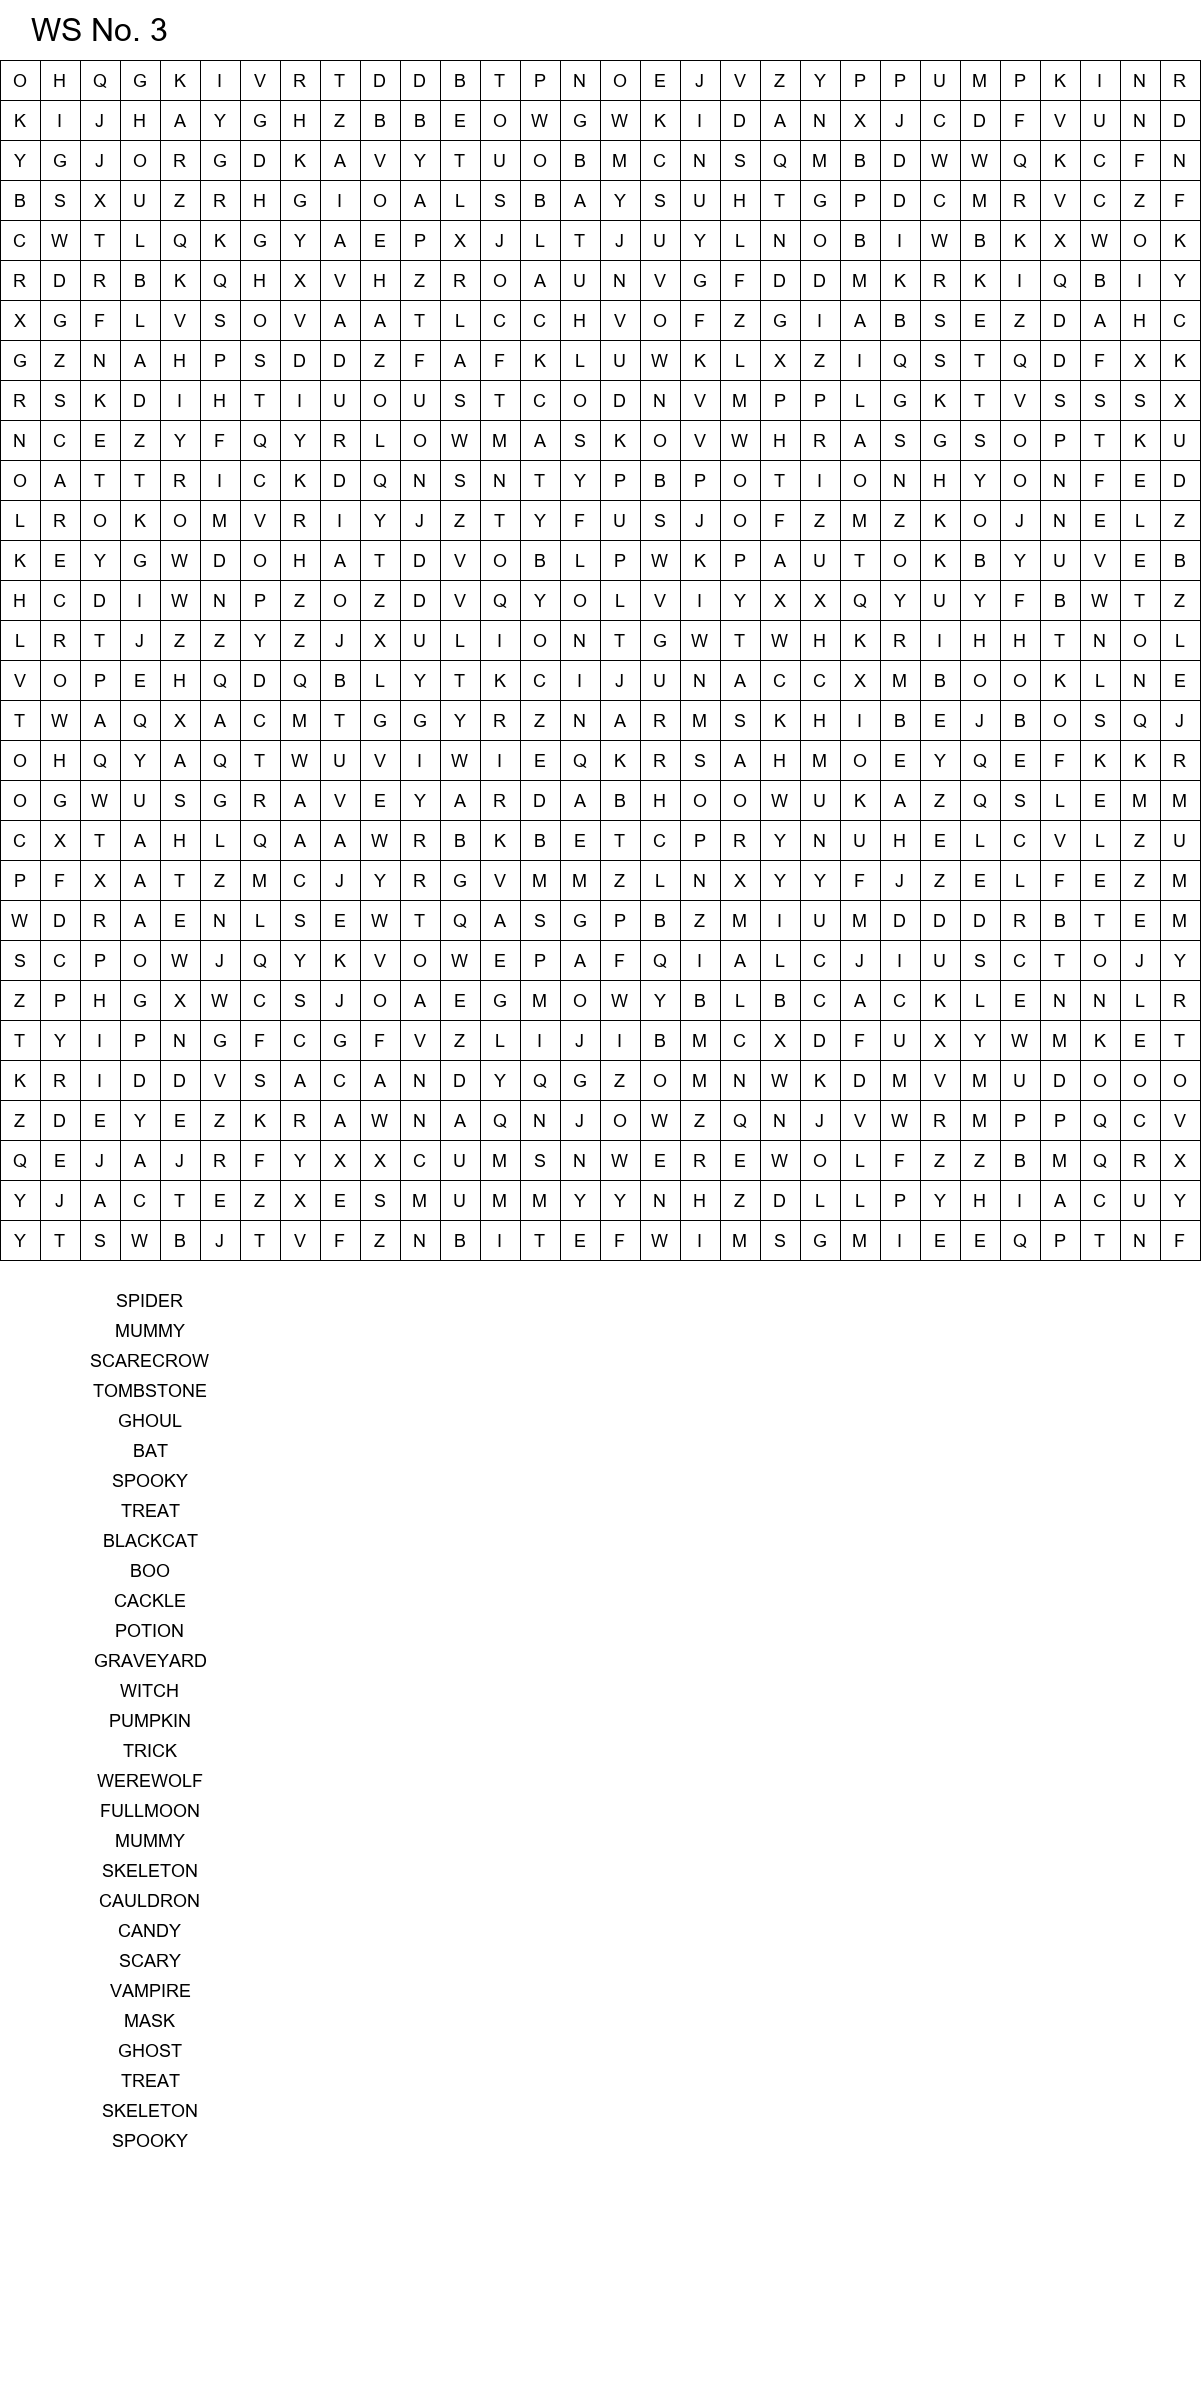 Challenging Halloween word search for adults size 30x30 No 3